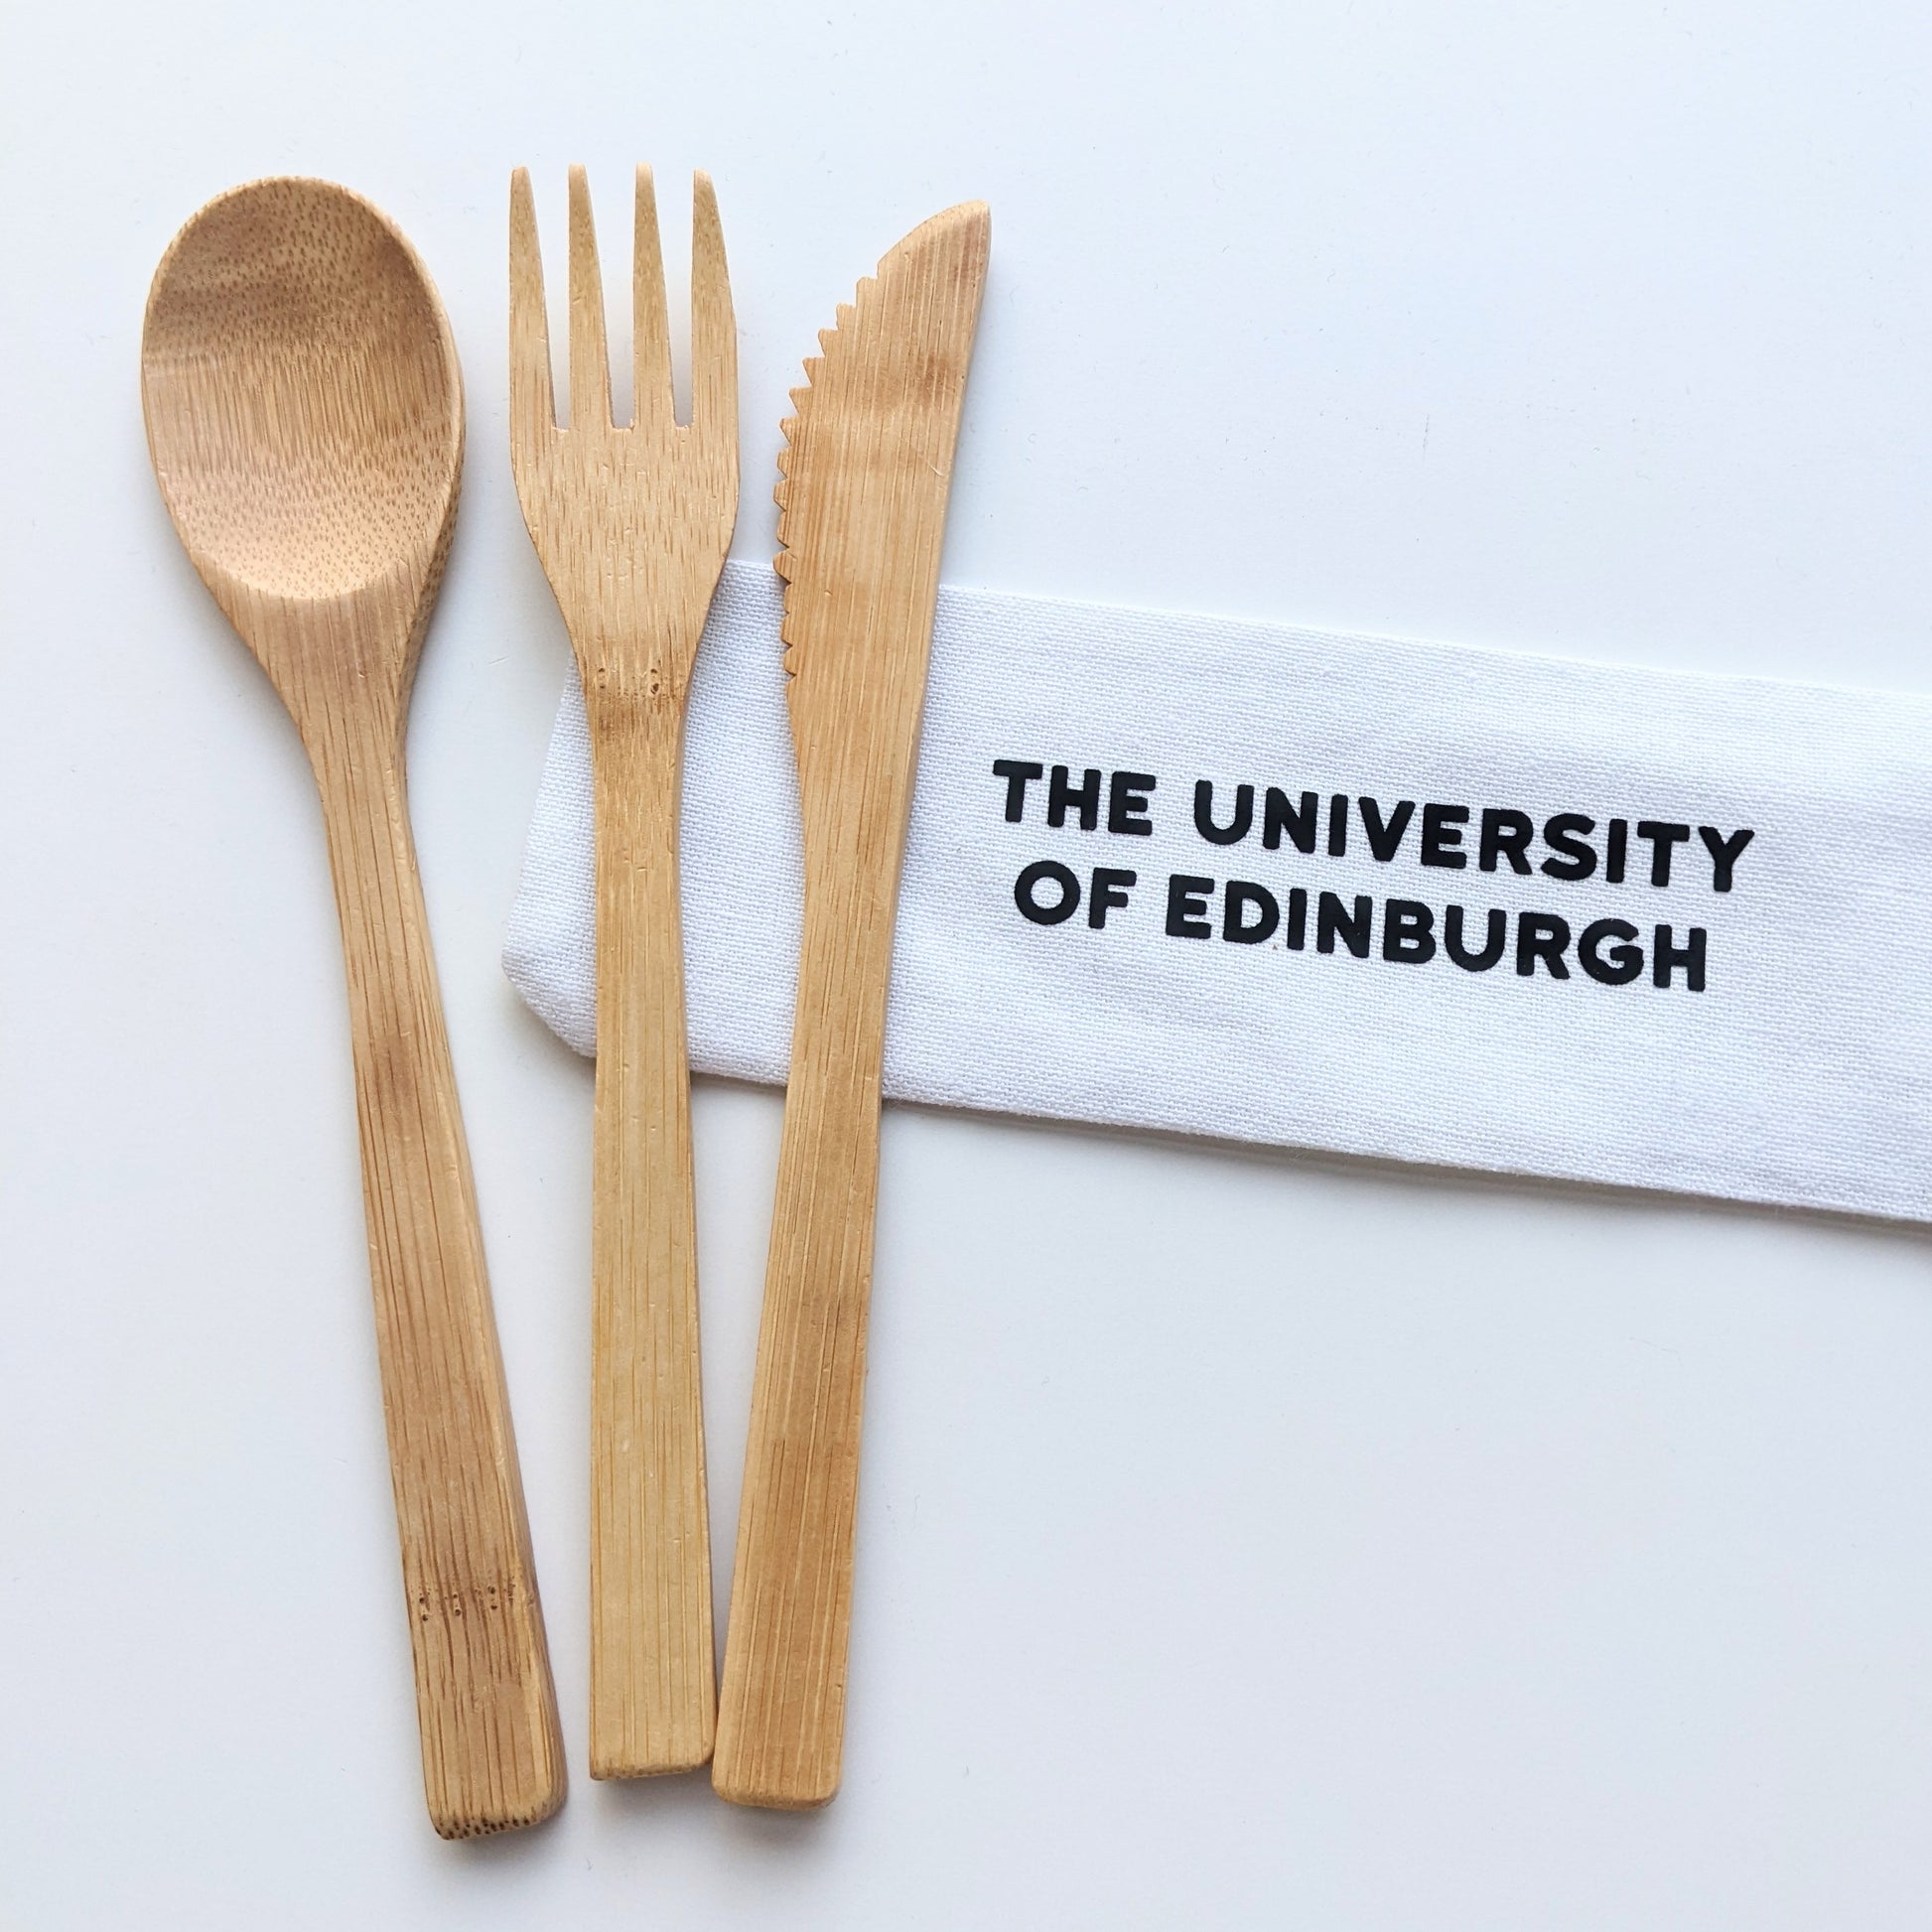 Bamboo cutlery and pouch